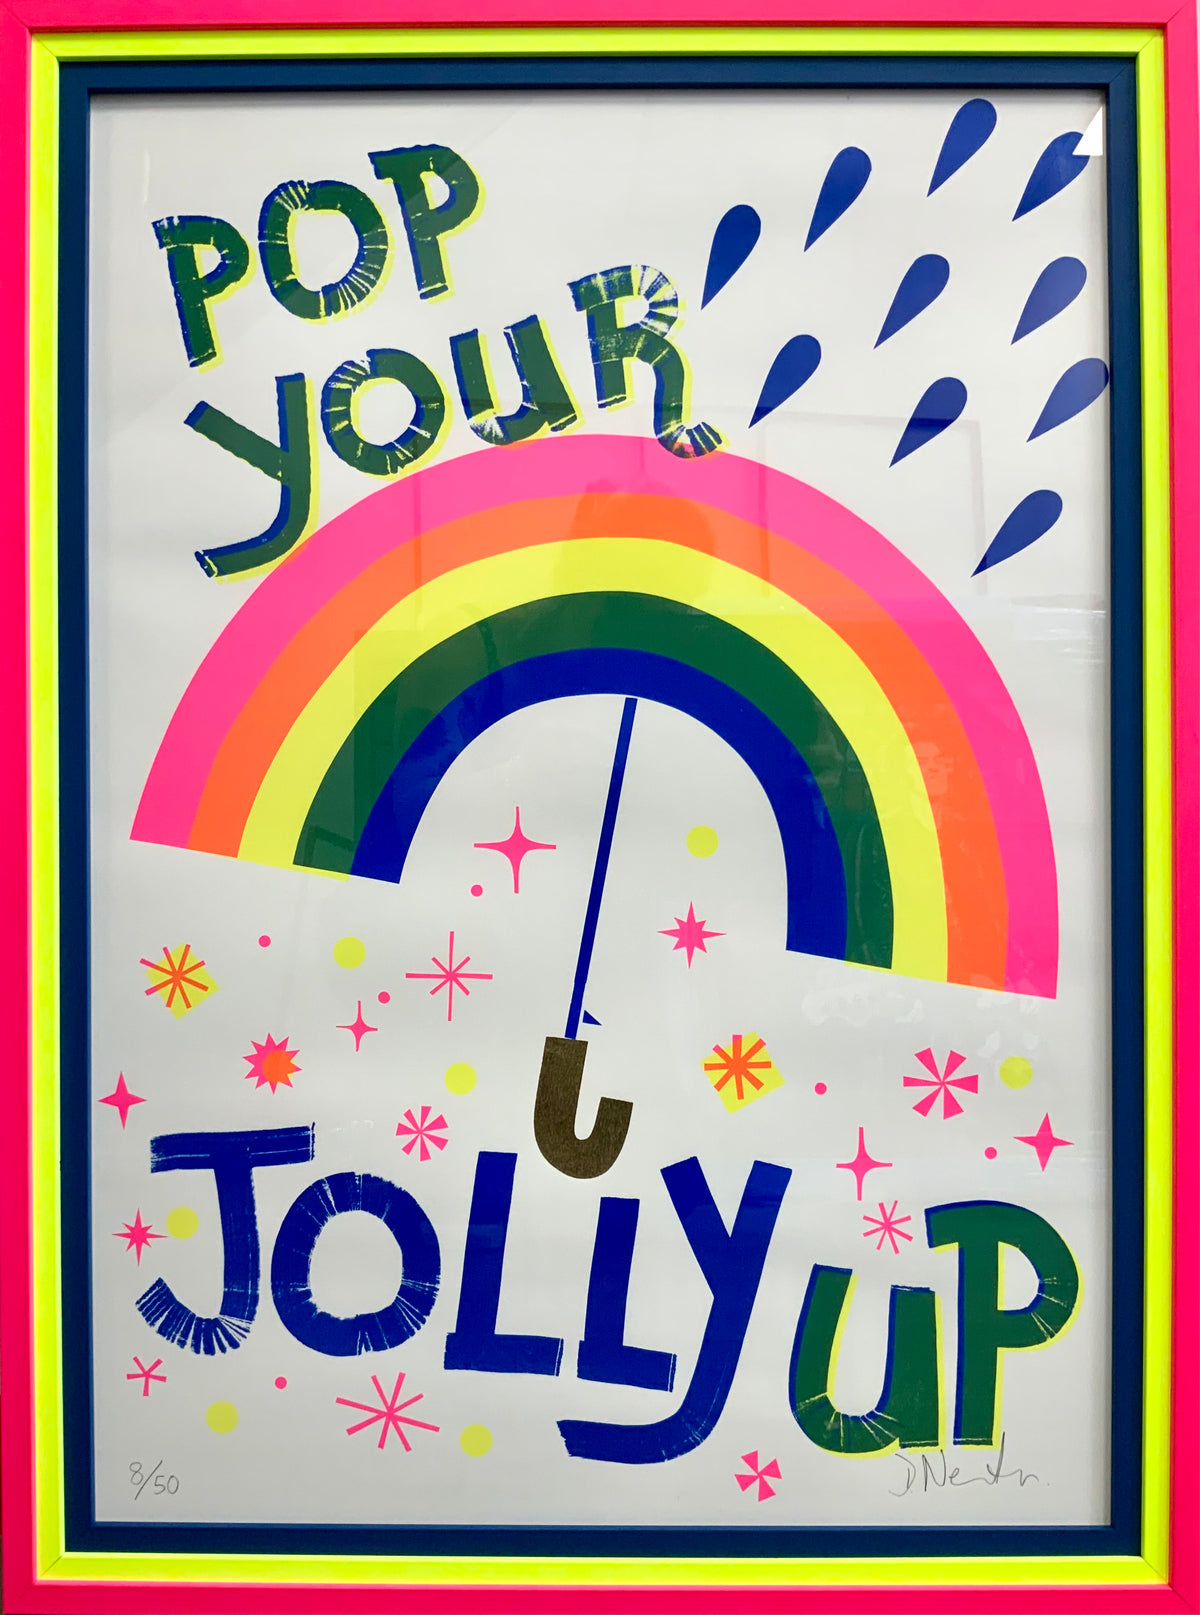 Pop Your Jolly Up (Hooked Framed) by David Newton